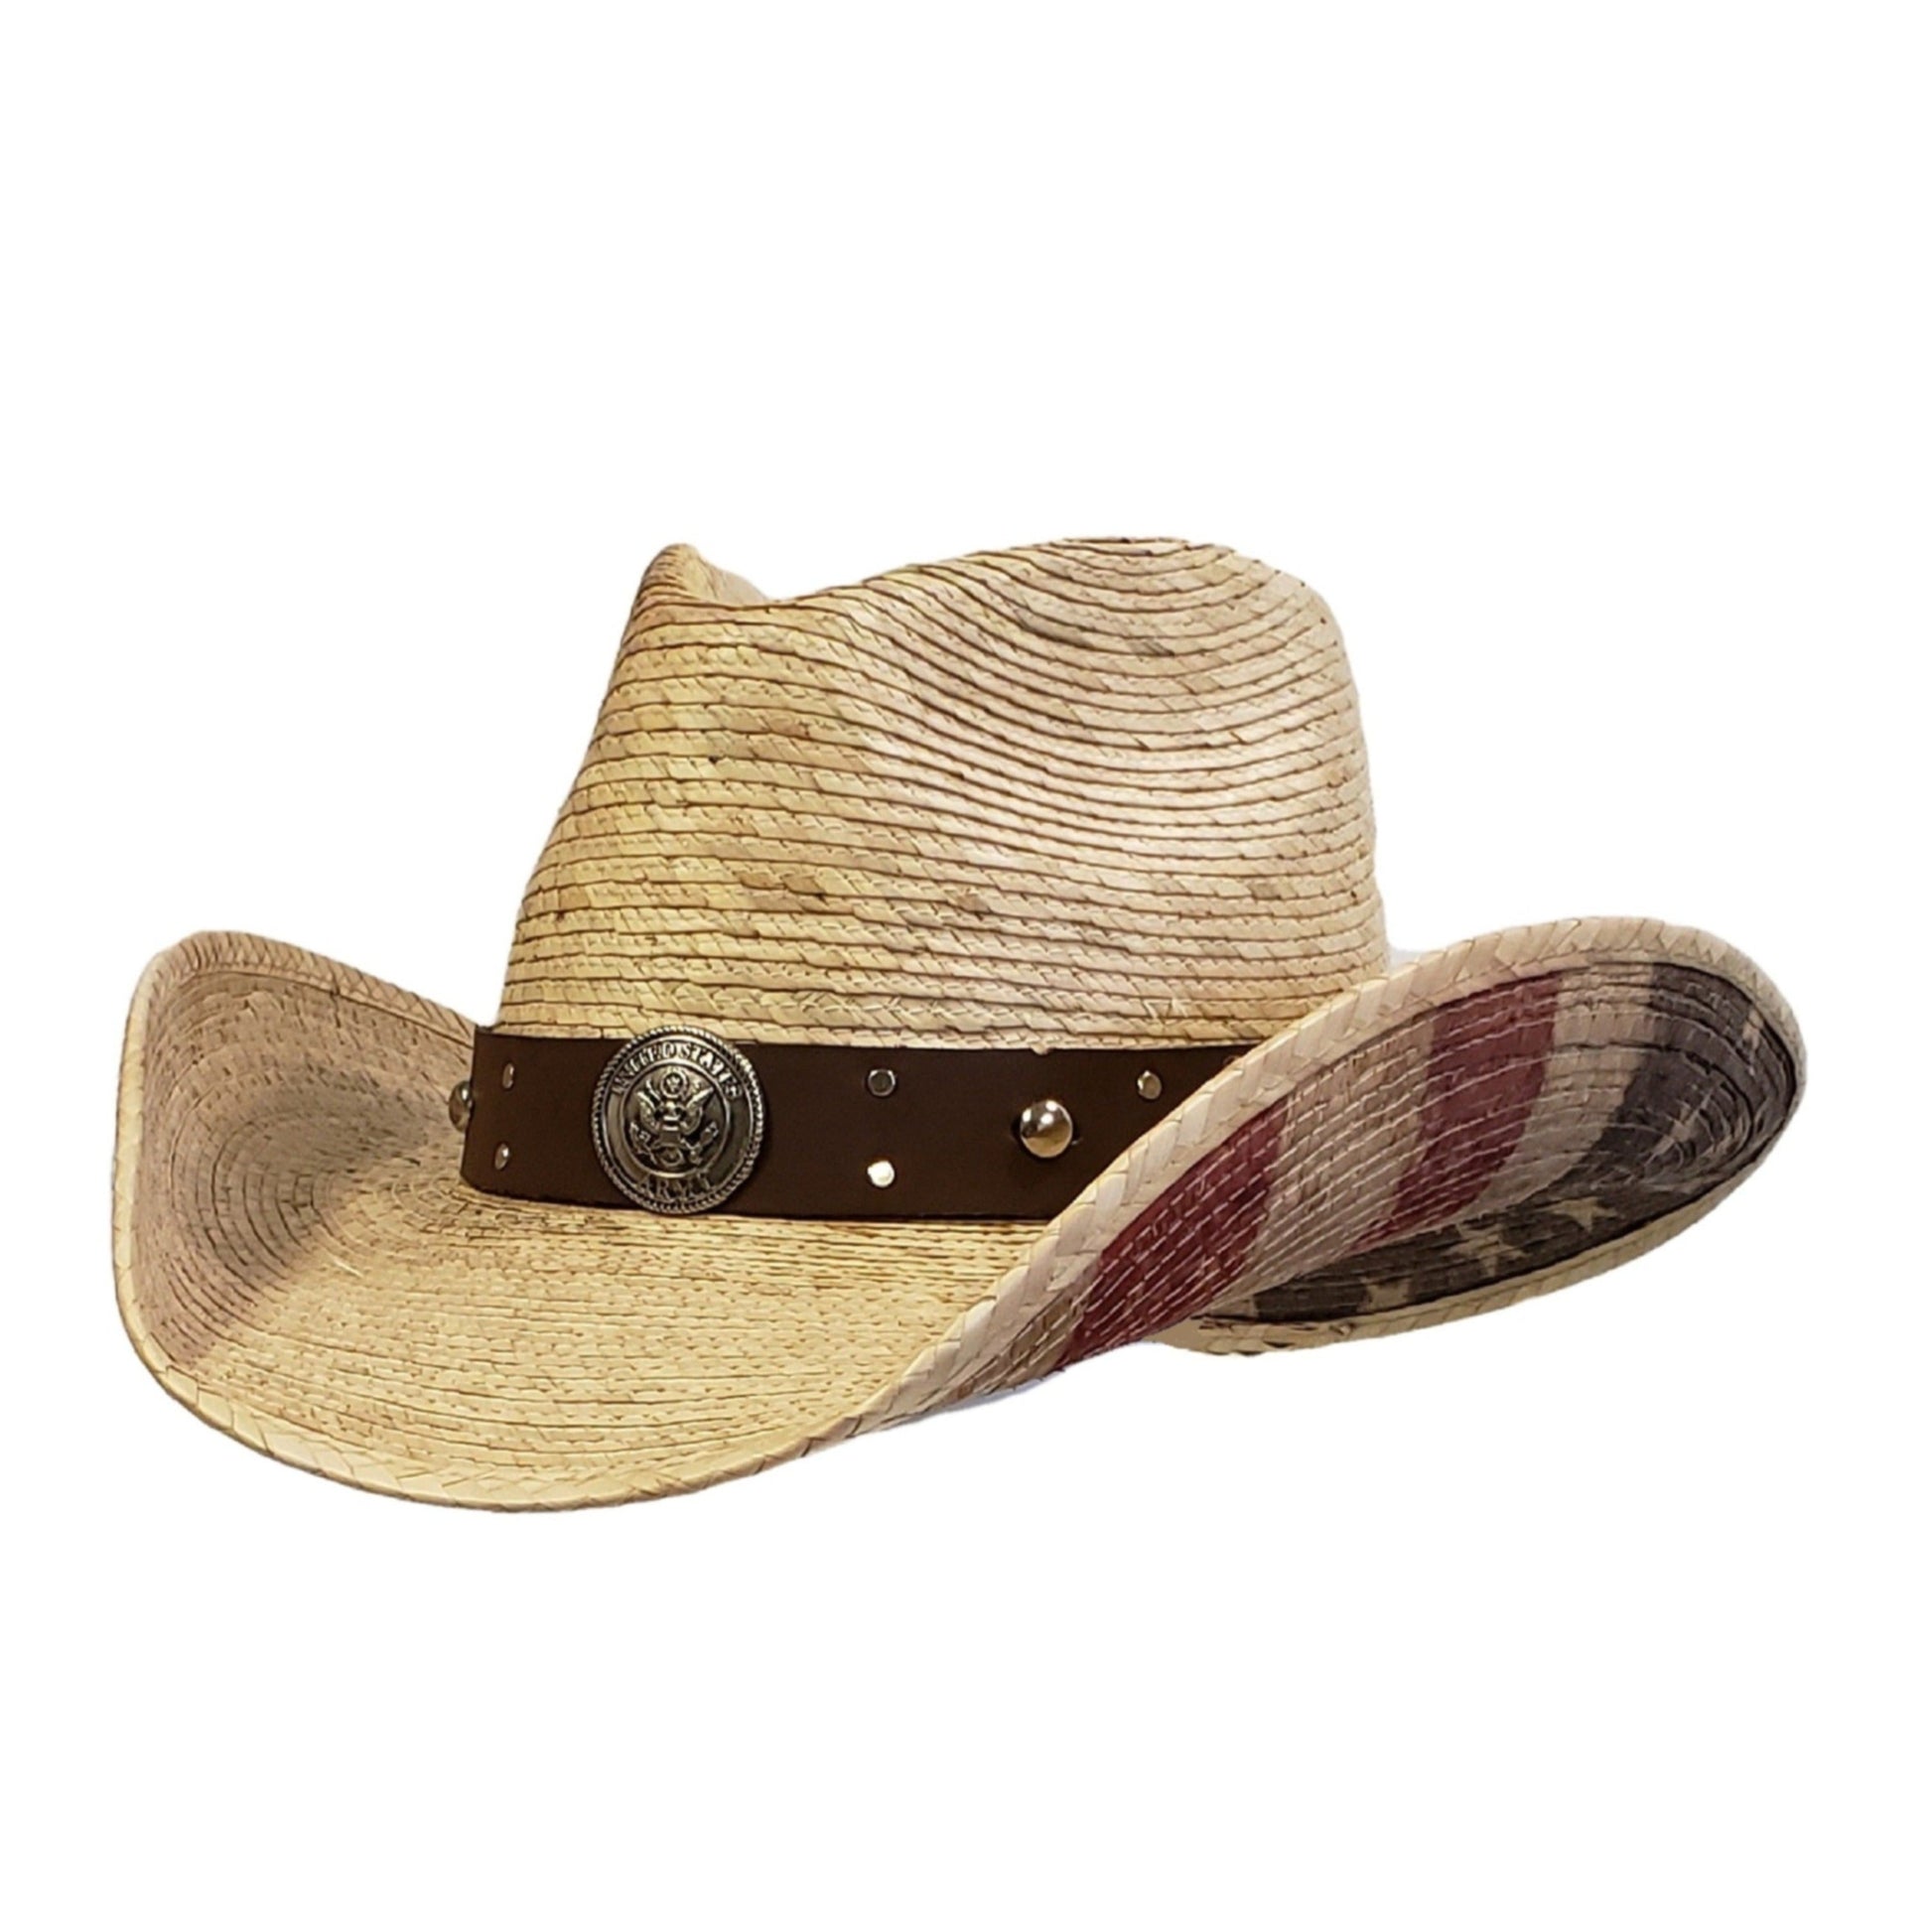 Army Heroes Western Hats Large Fits 7-3/8 to 7-1/2 / American Flag Palm Straw